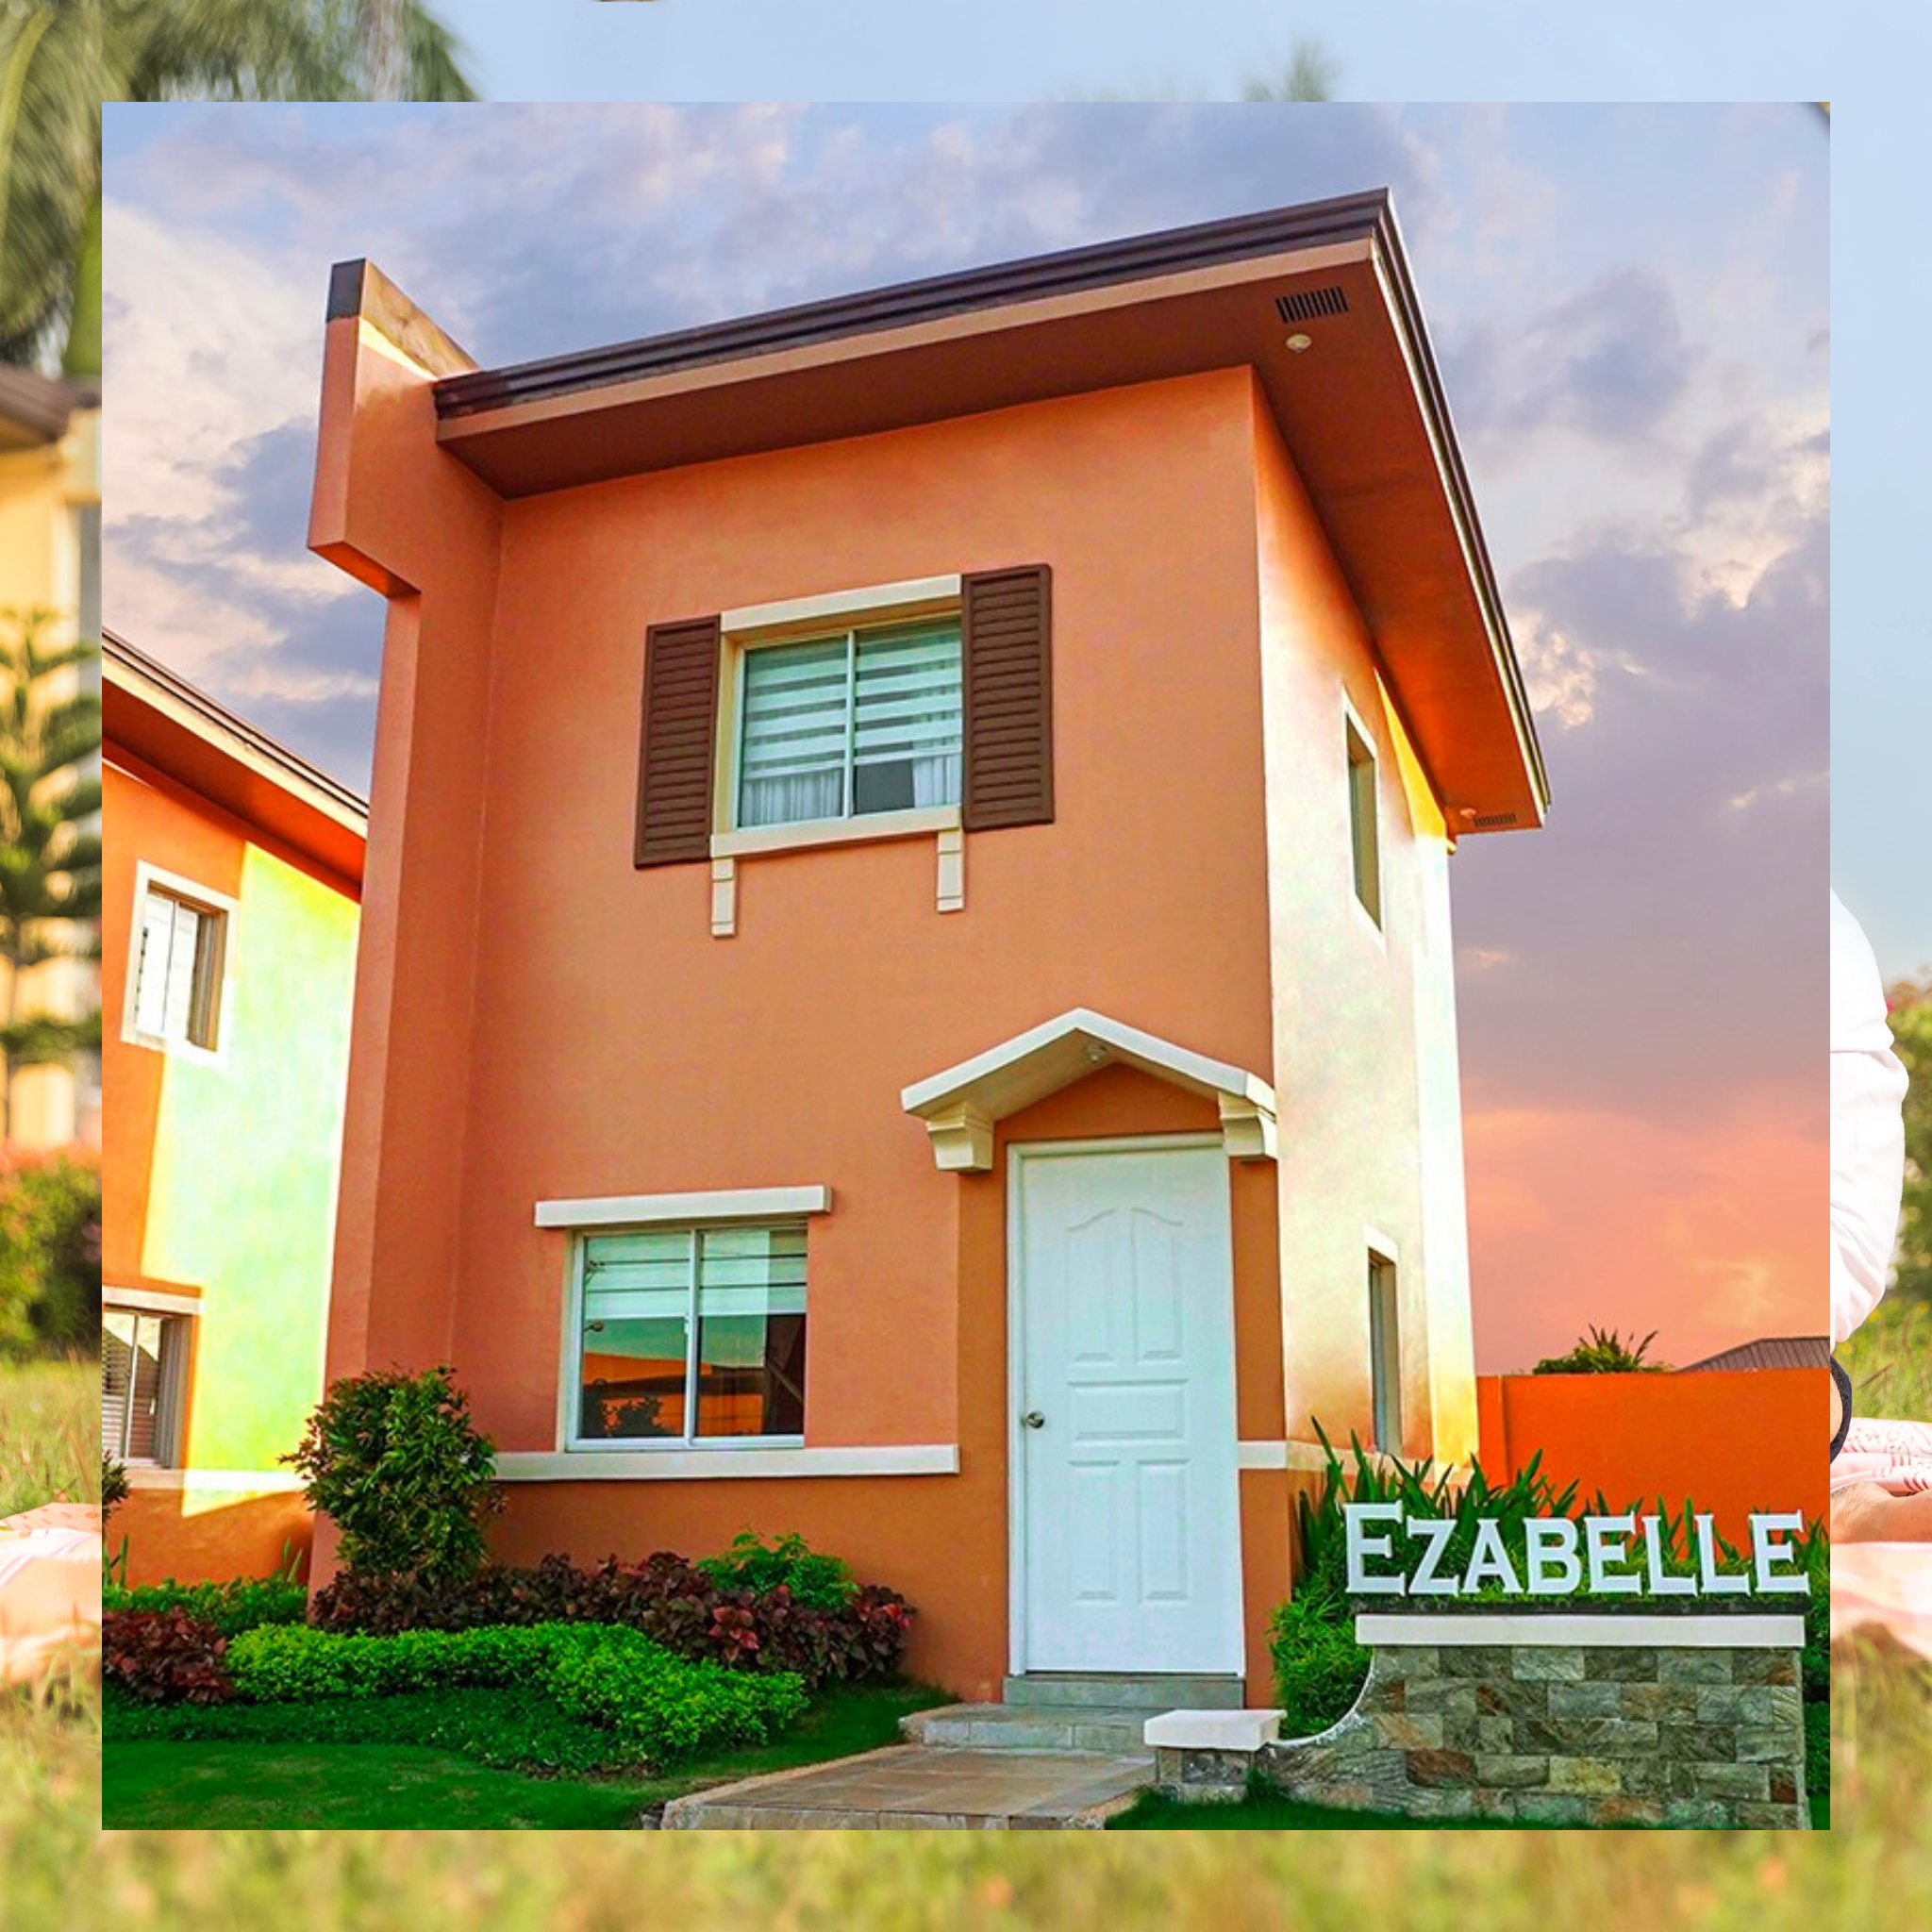 2BR Affordable House and Lot For Sale in San Juan Batangas – Ezabelle 72sqm